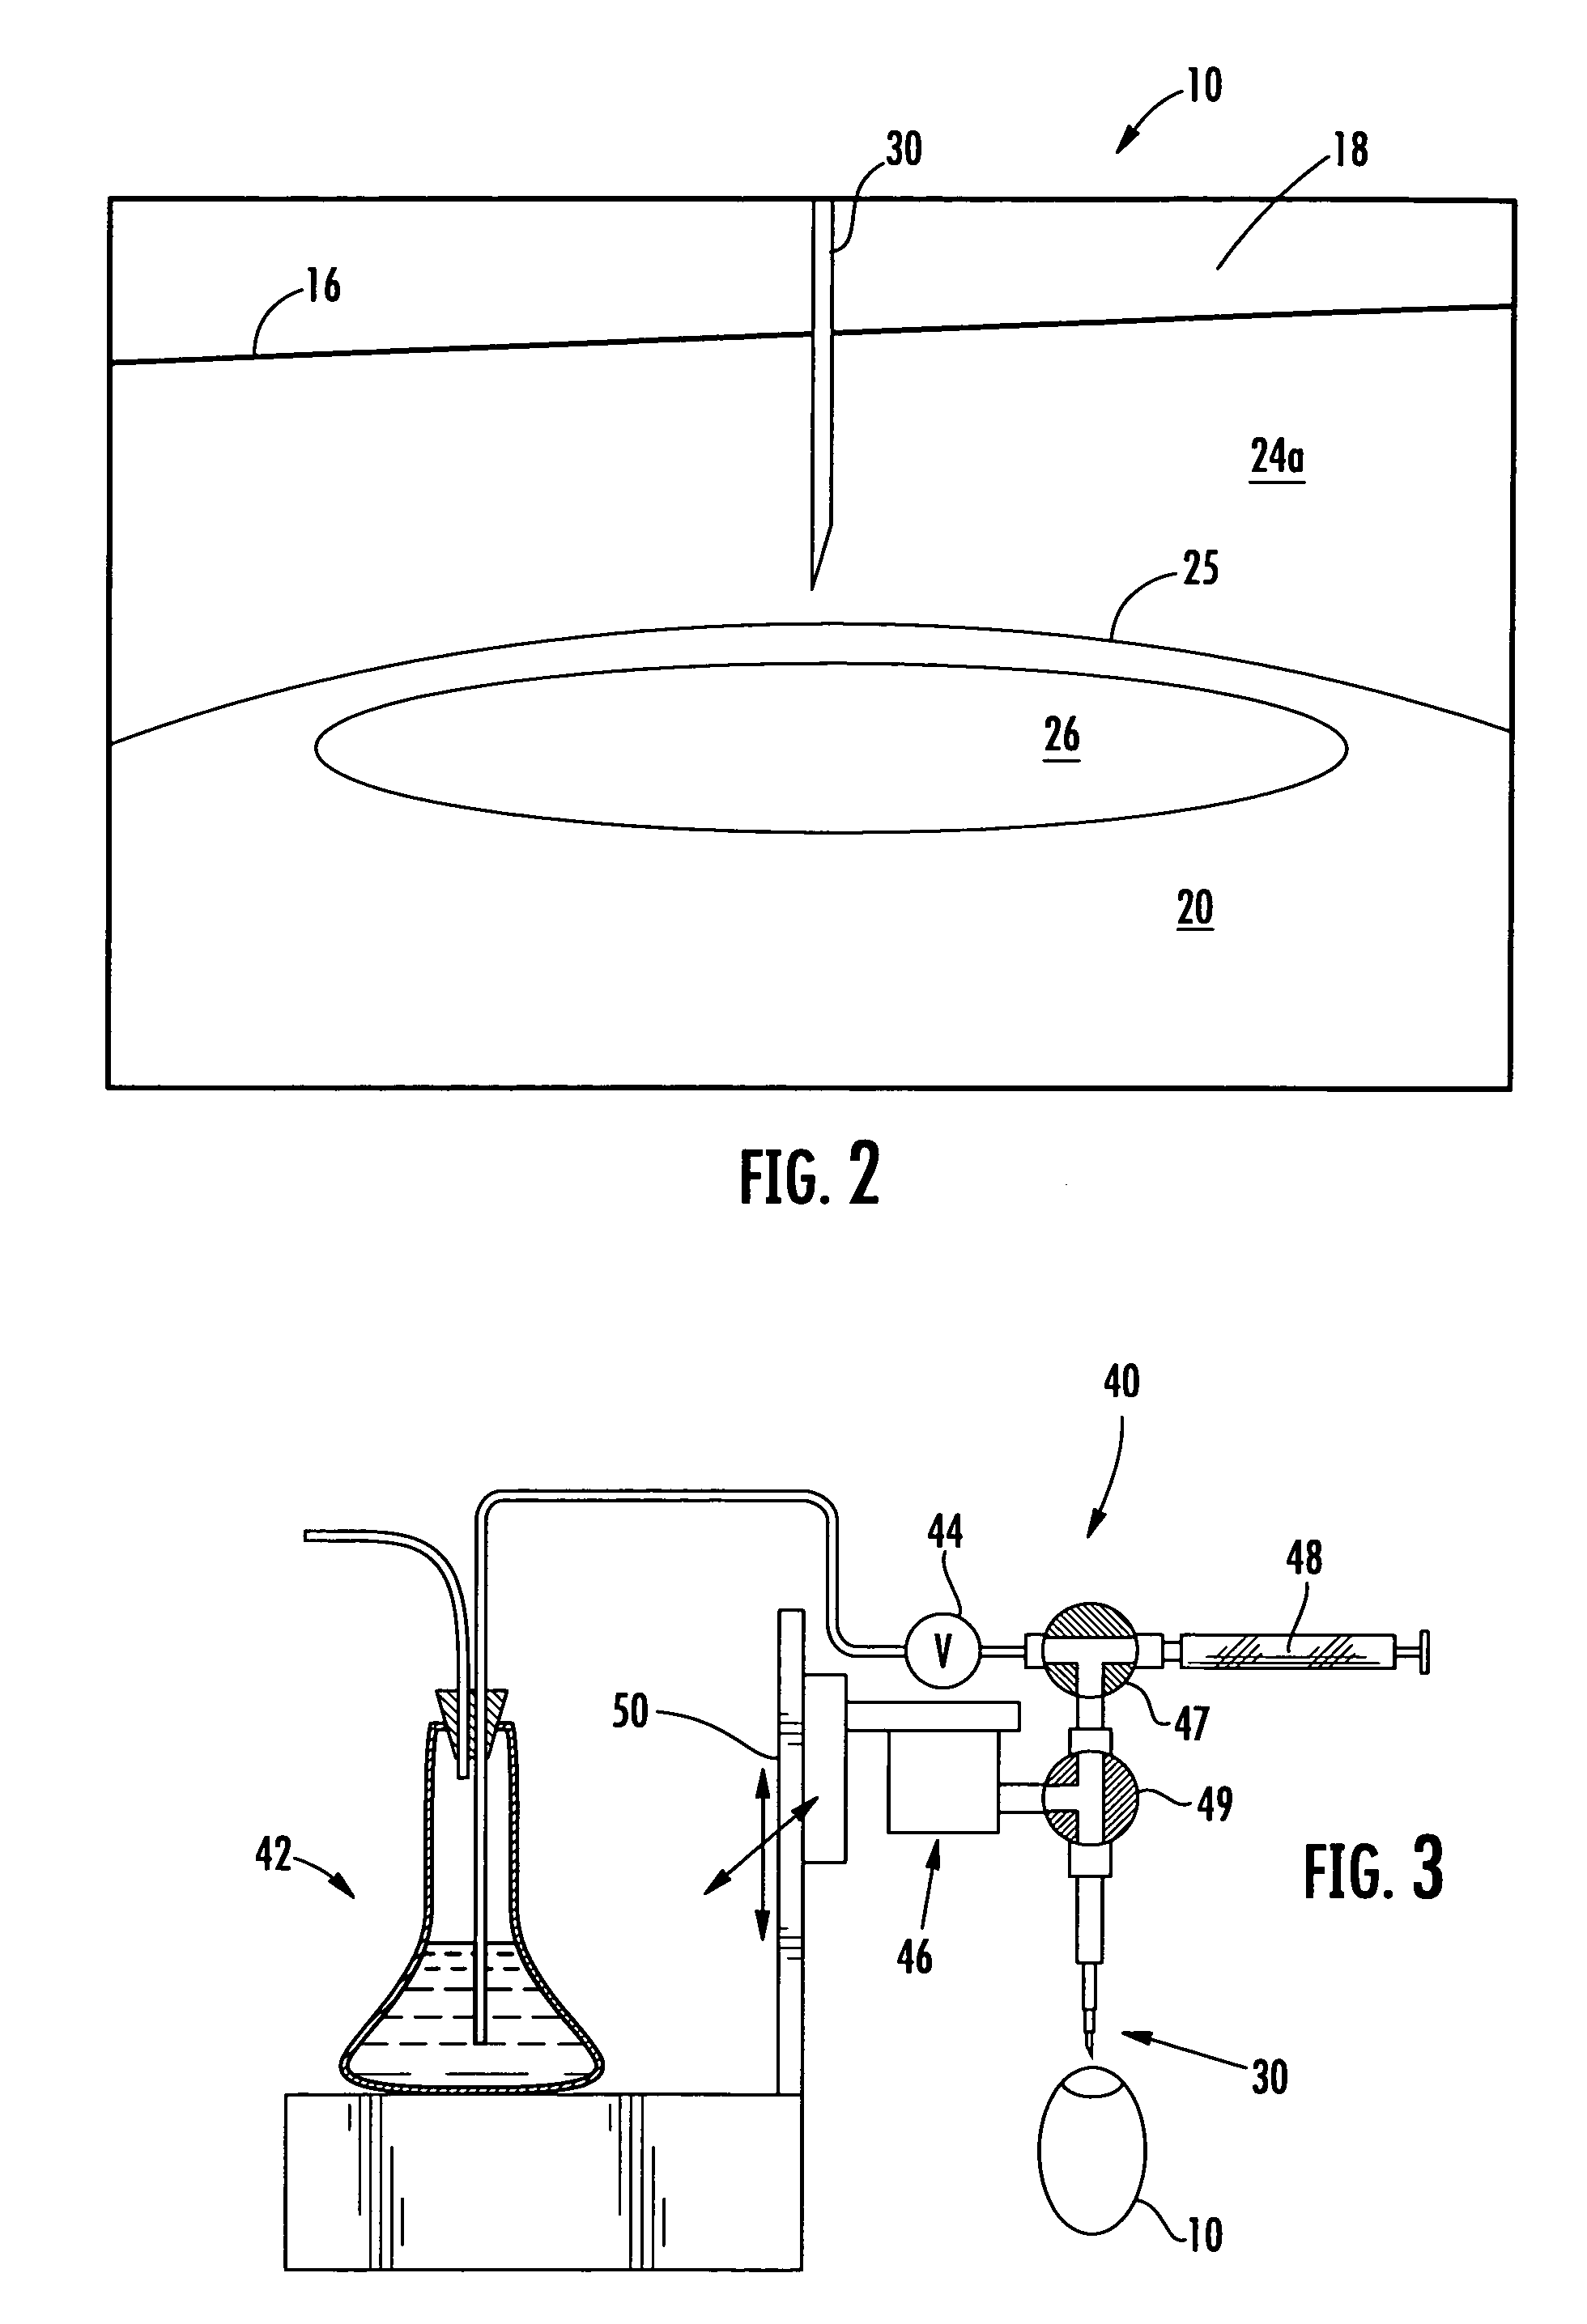 Methods and apparatus for accurately positioning a device within the subgerminal cavity of avian eggs